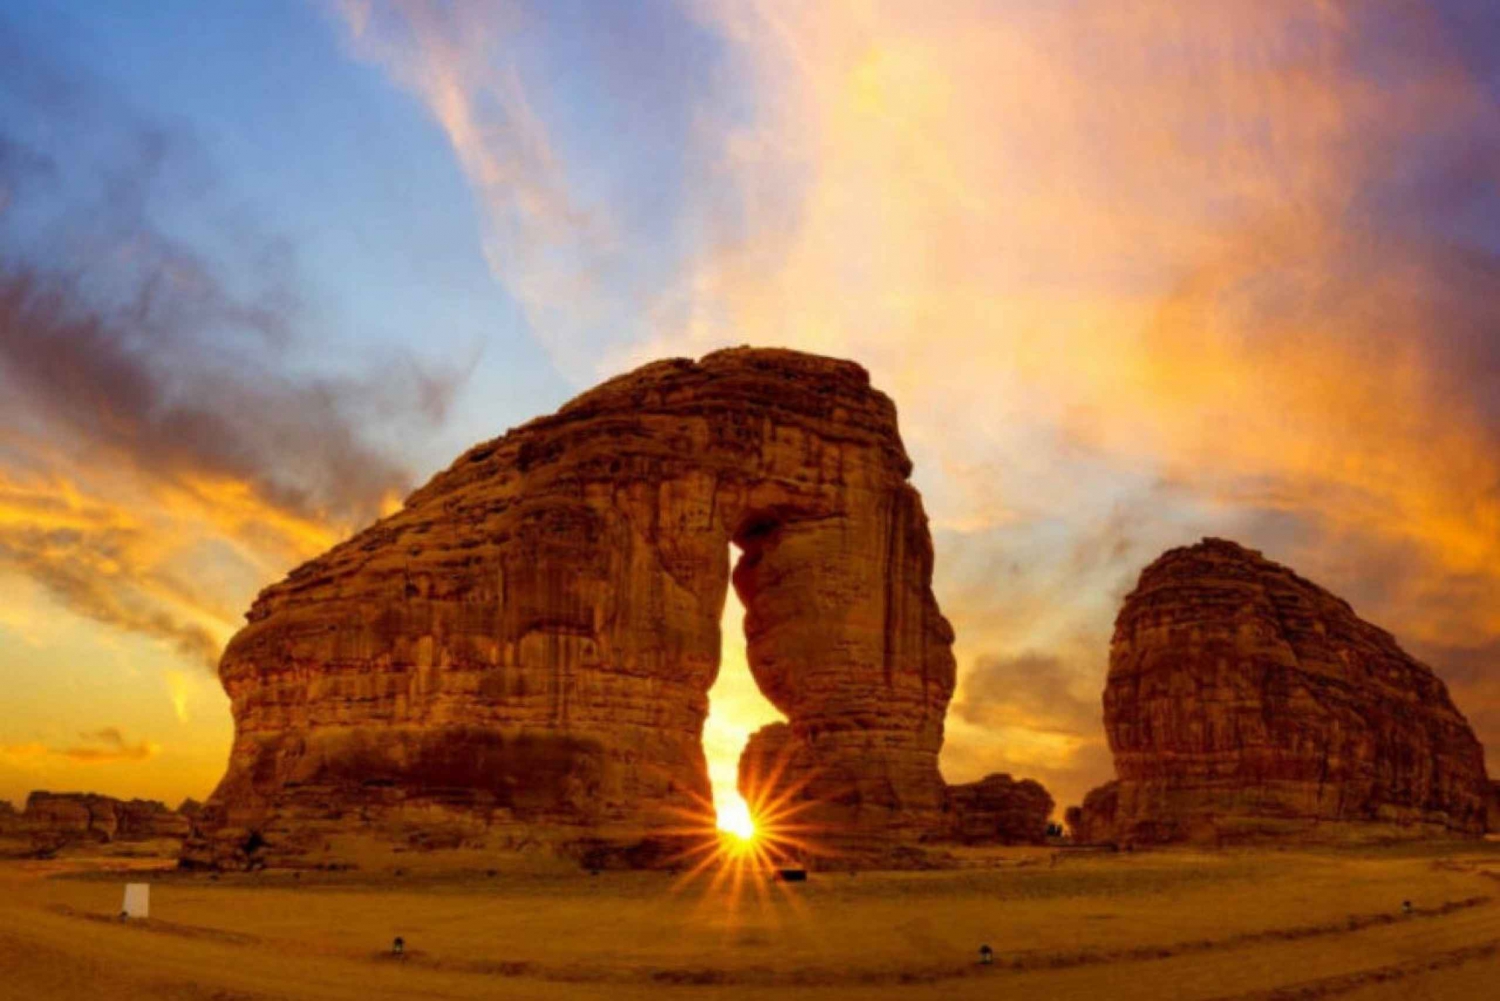 From Riyadh: 3-Day Al Ula Tour Package with Hotel Stay